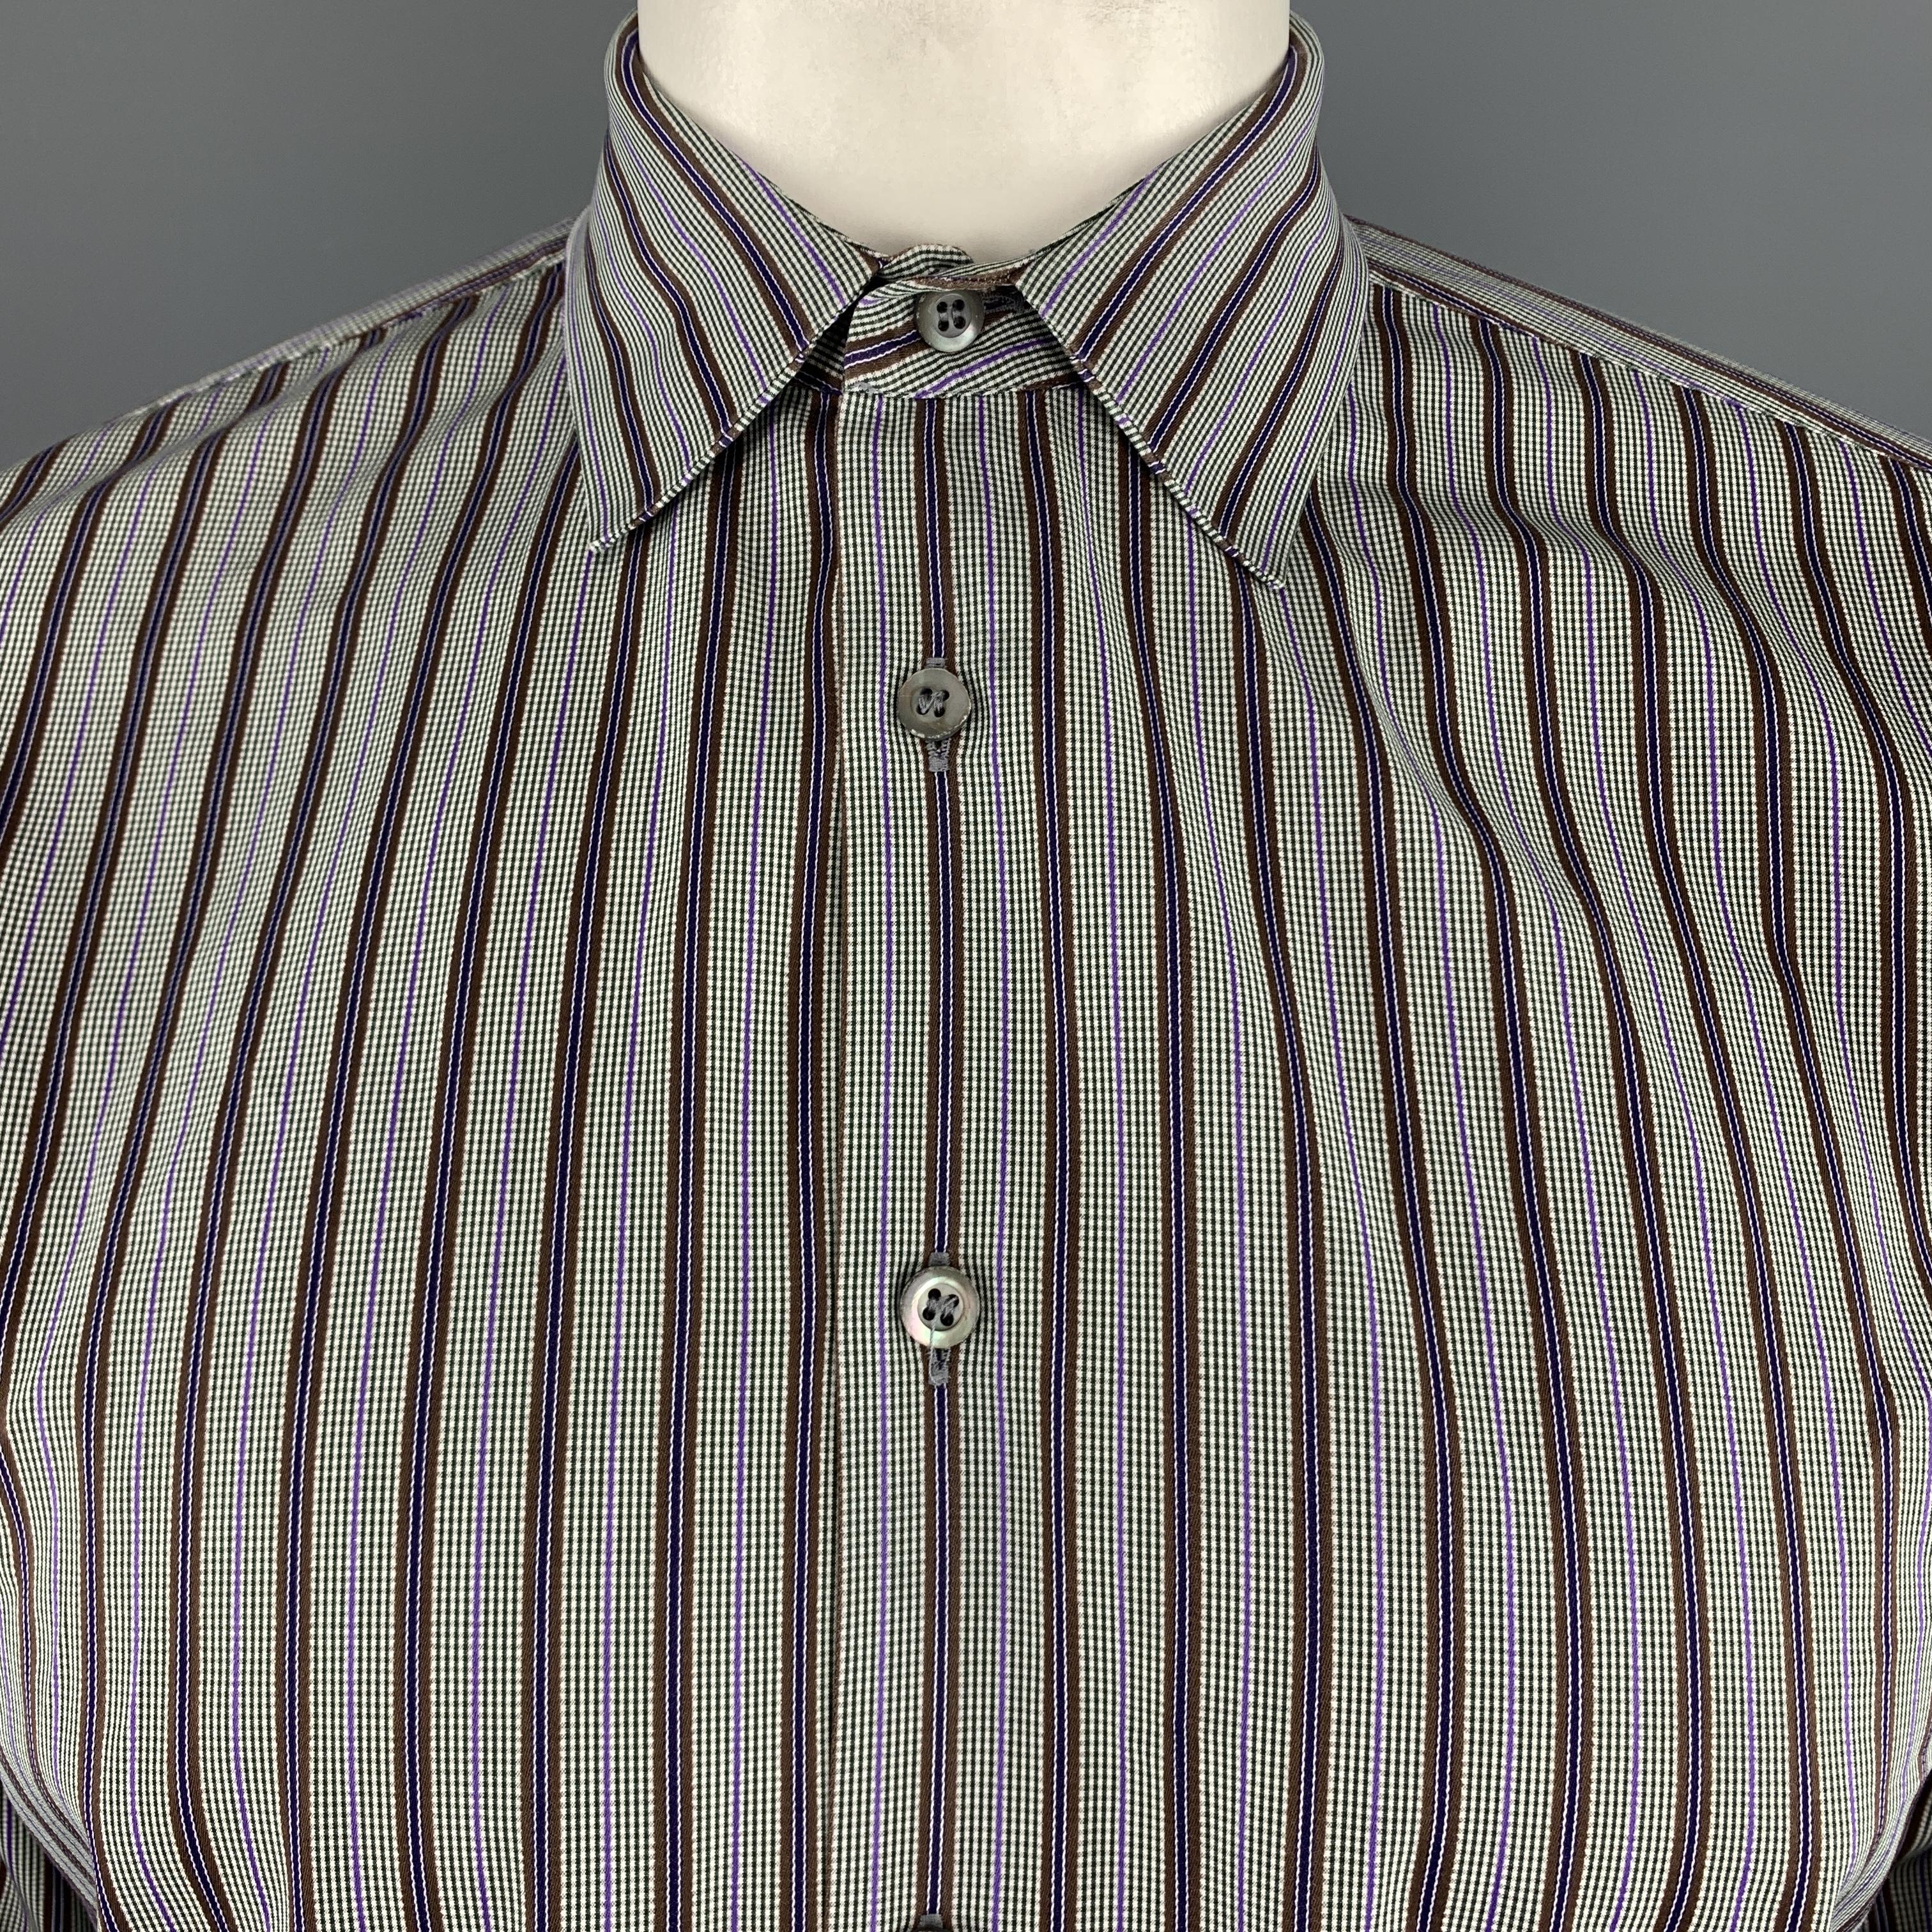 PRADA dress shirt comes in light gray cotton with brown, purple, navy, and green stripe pattern throughout and a classic pointed collar. Made in Italy. 

Excellent Pre-Owned Condition.
Marked: 42/16.5

Measurements:

Shoulder: 17.5 in.
Chest: 44